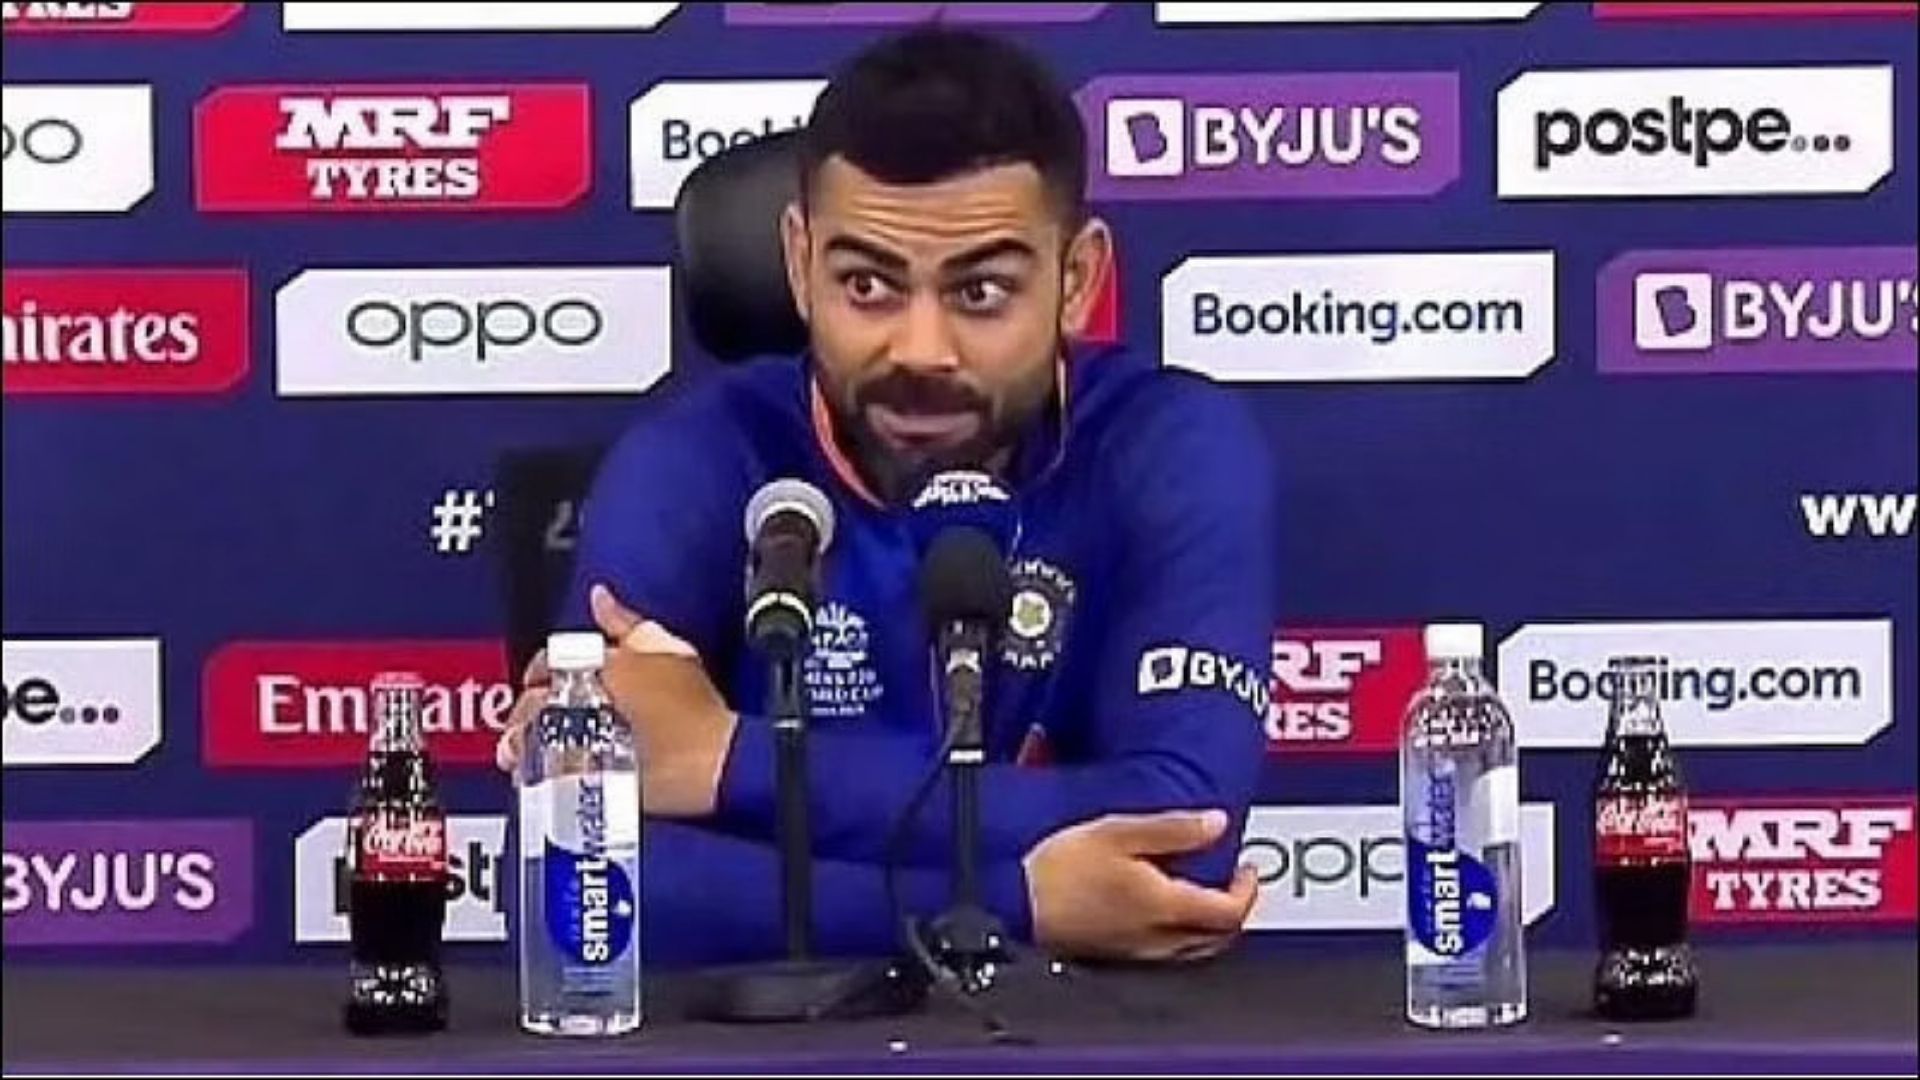 Virat Kohli has produced some unforgettable moments in his press conferences over the years